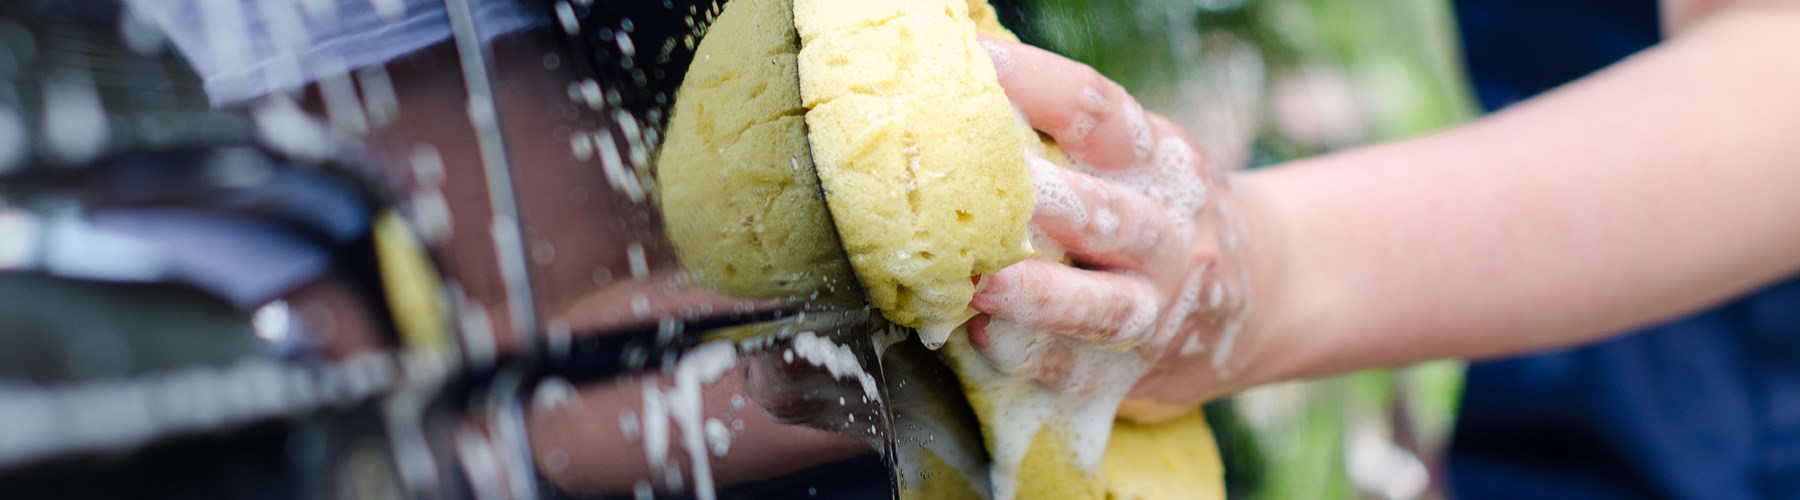 Woman's hand washing car with a yellow sponge